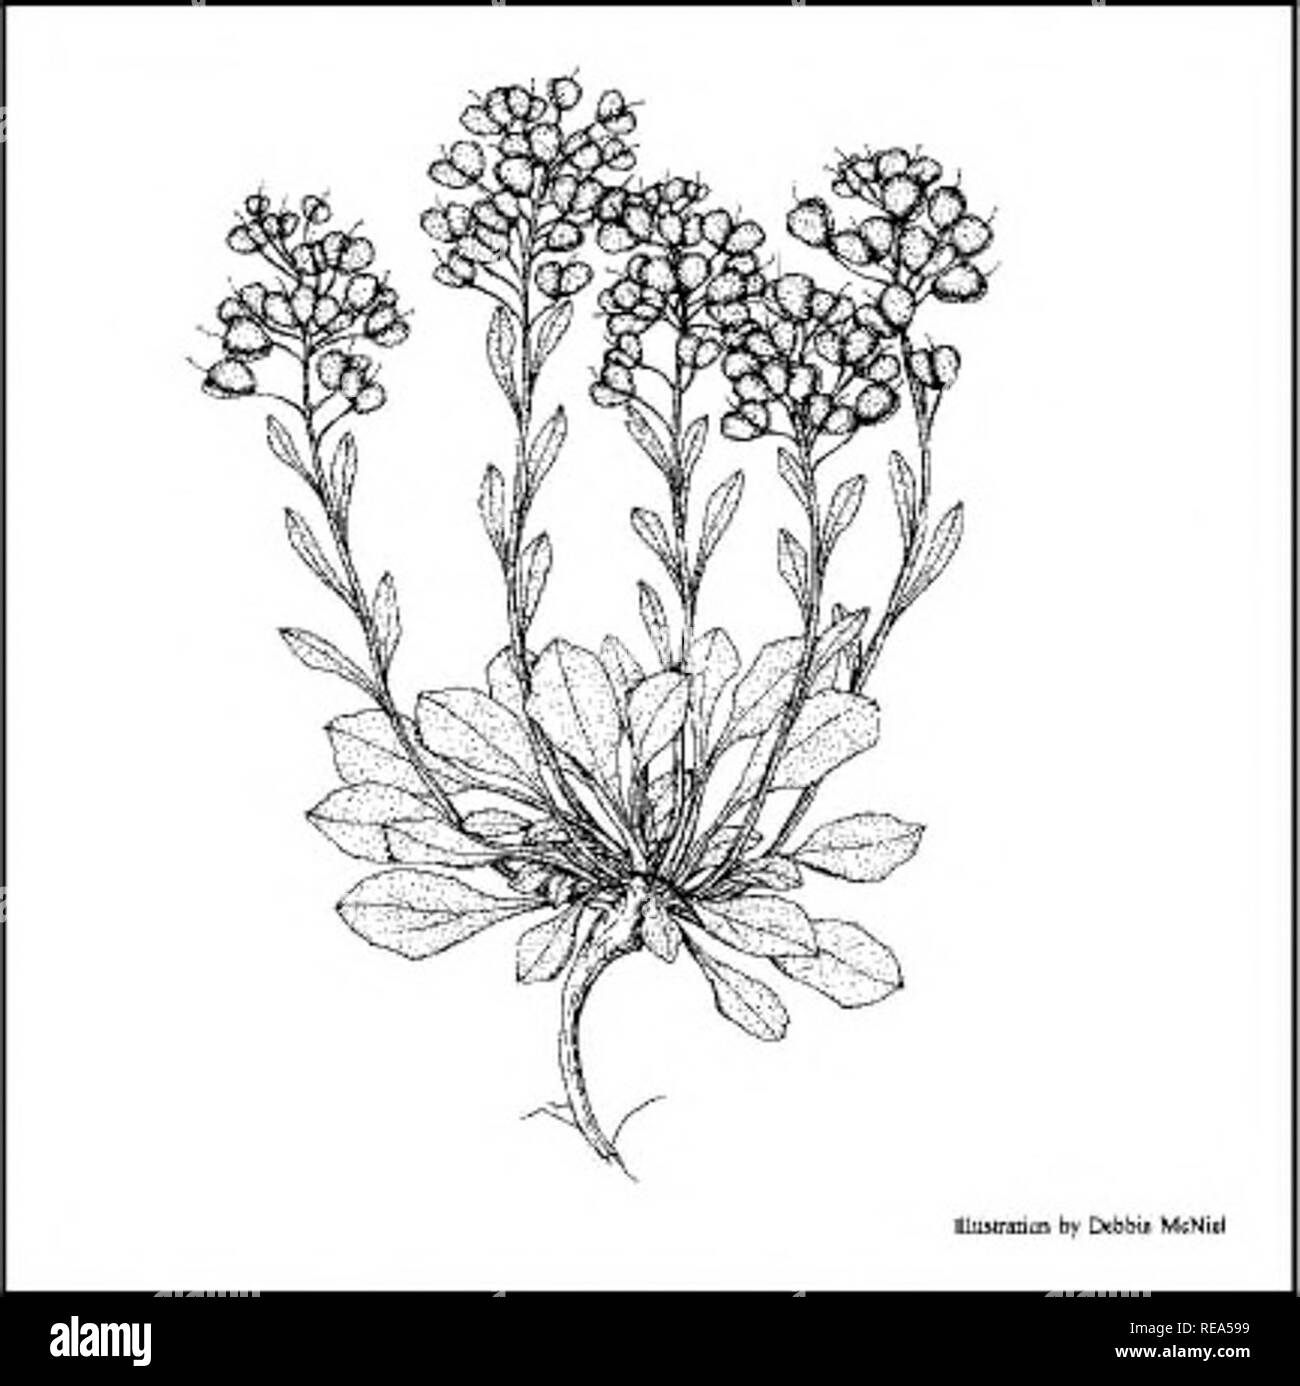 . Plant species of concern and plant associations of Powder River county, Montana . Plant communities; Endangered plants; Rare plants; Botany; Plant conservation. Figure 26. Illustration of Physaria brassicoides petals that are 9 to 12 mm long and 4 separate sepals. The ascending, inflated fmits are 1 to 2 cm long, at least as wide, and flattened on top. They are 2-lobed witli the locules (lobes) more deeply defined above than below. There are 2 ovules in each of the locules, attached at the top of the replum (suture between tlie two locules), and tlie replum has a linear outline. The style is Stock Photo